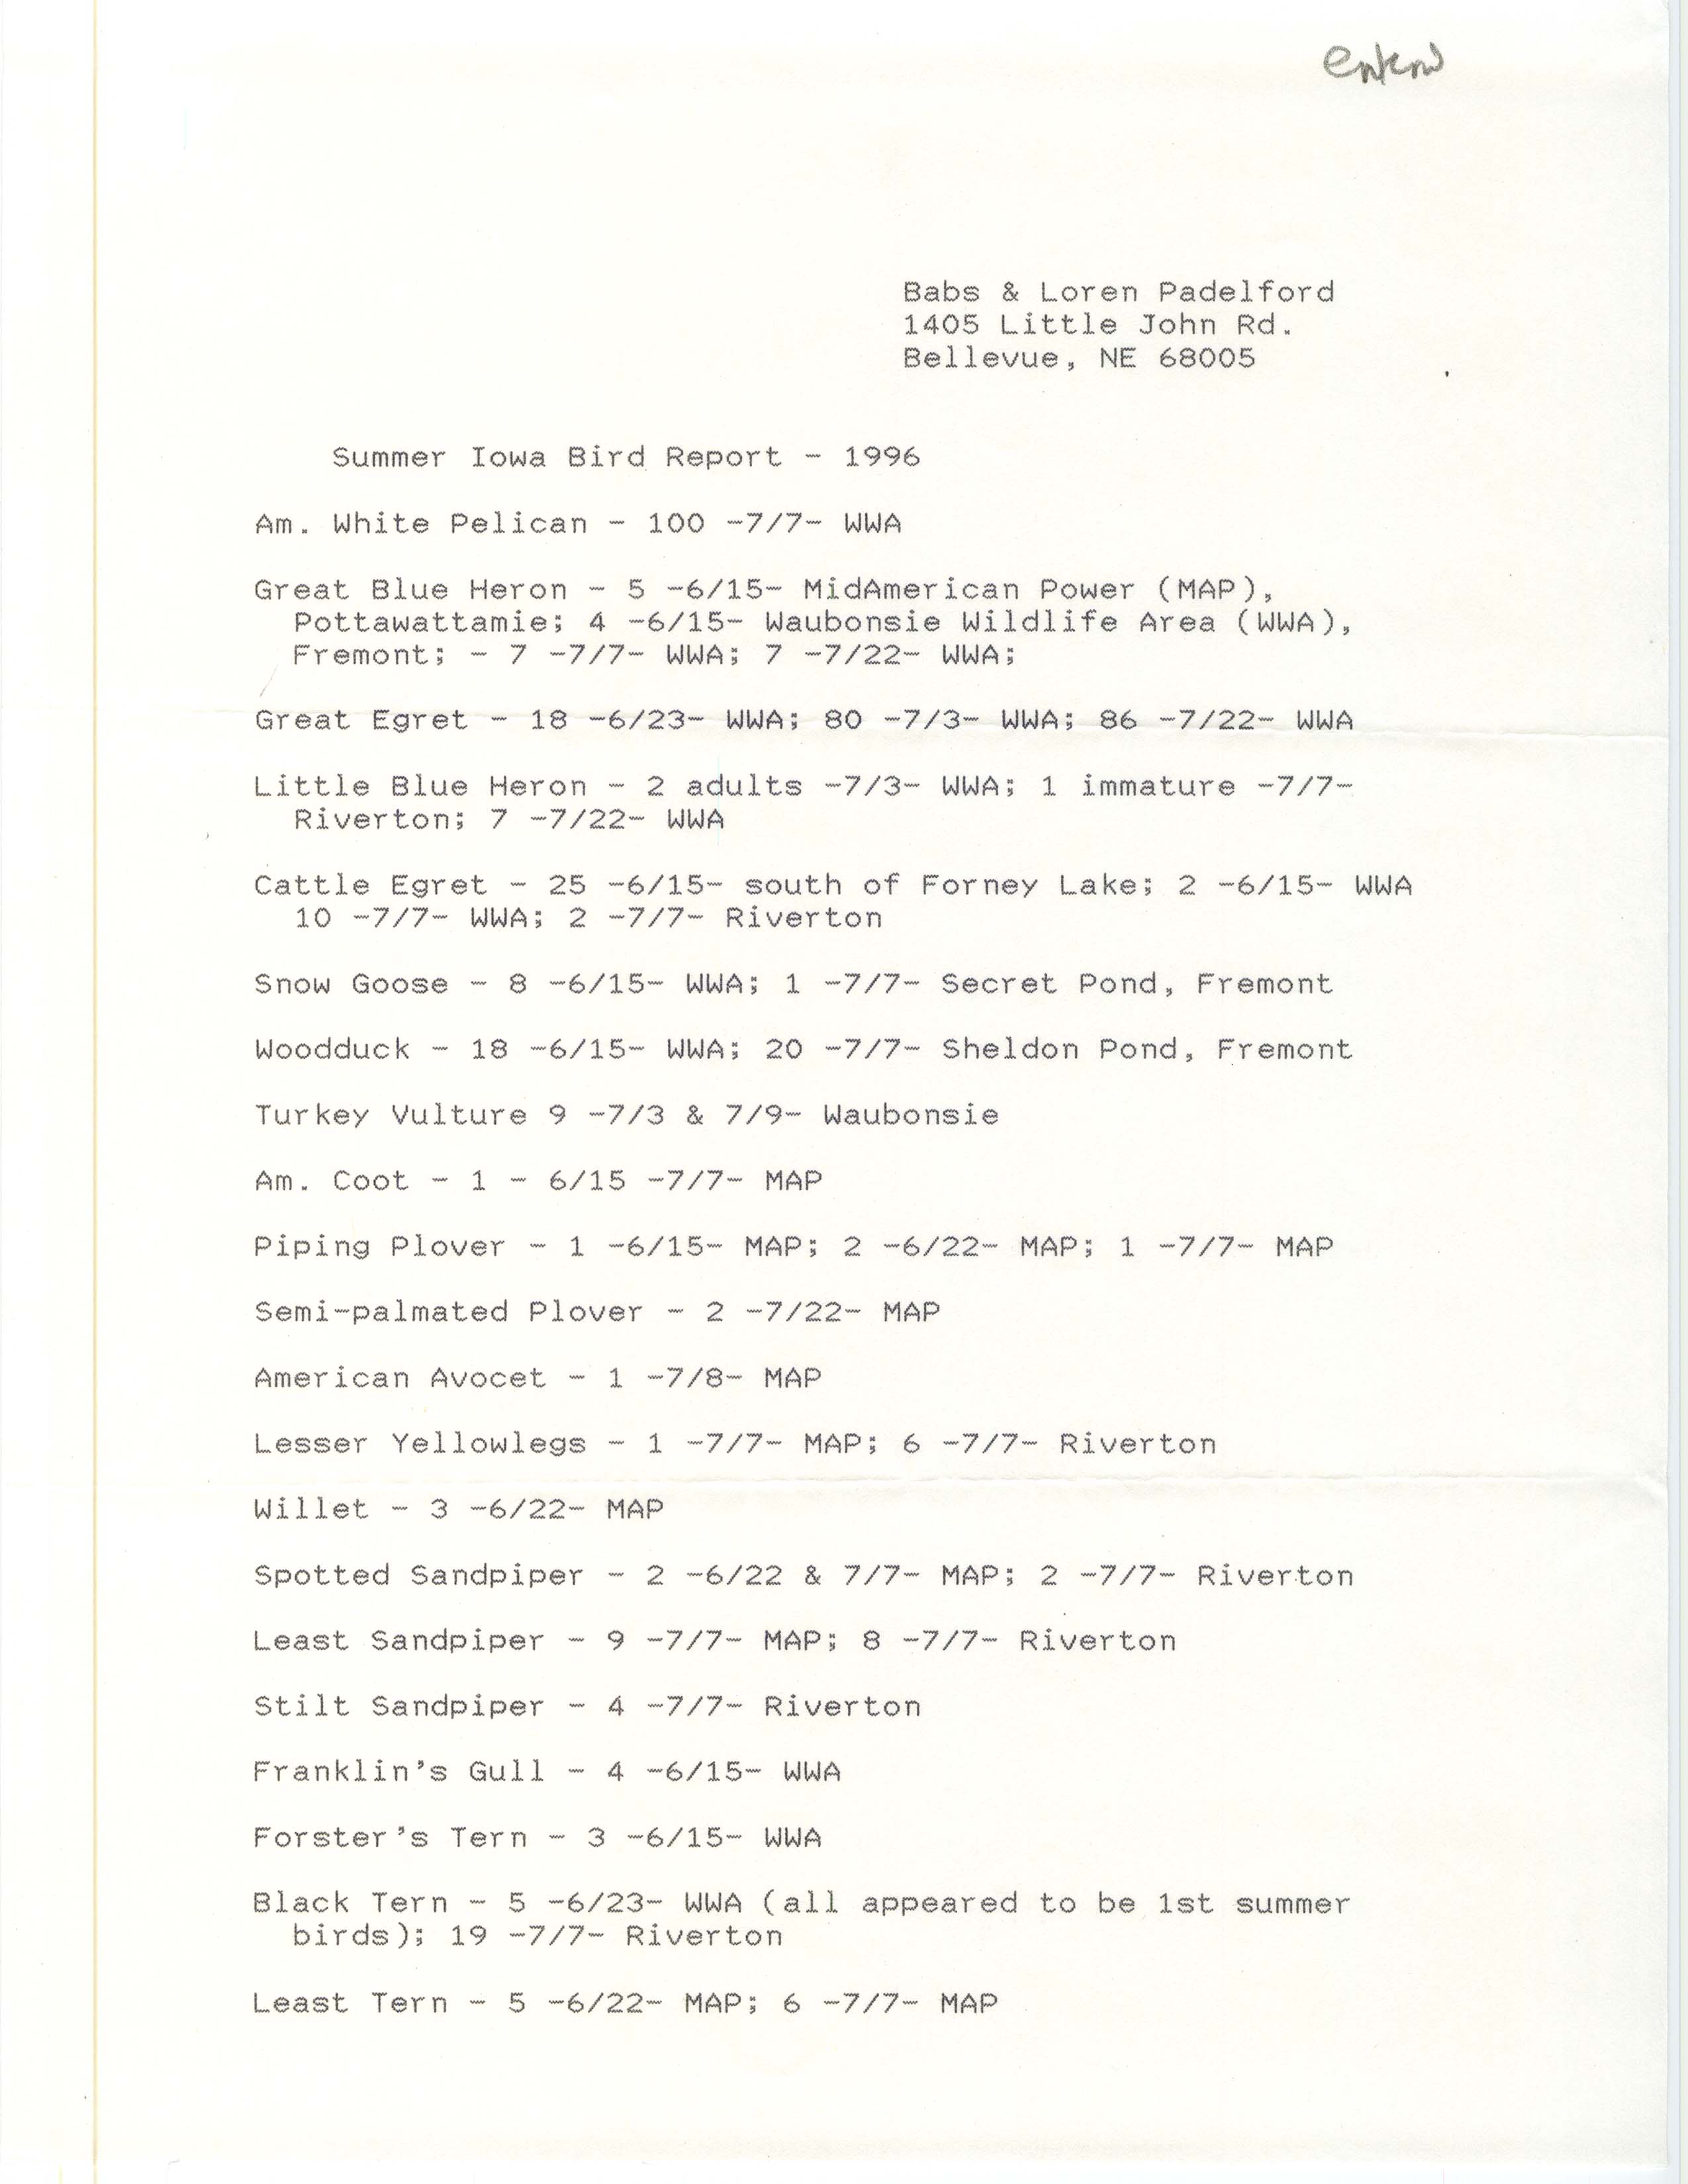 Field notes contributed by Babs Padelford and Loren Padelford, summer 1996